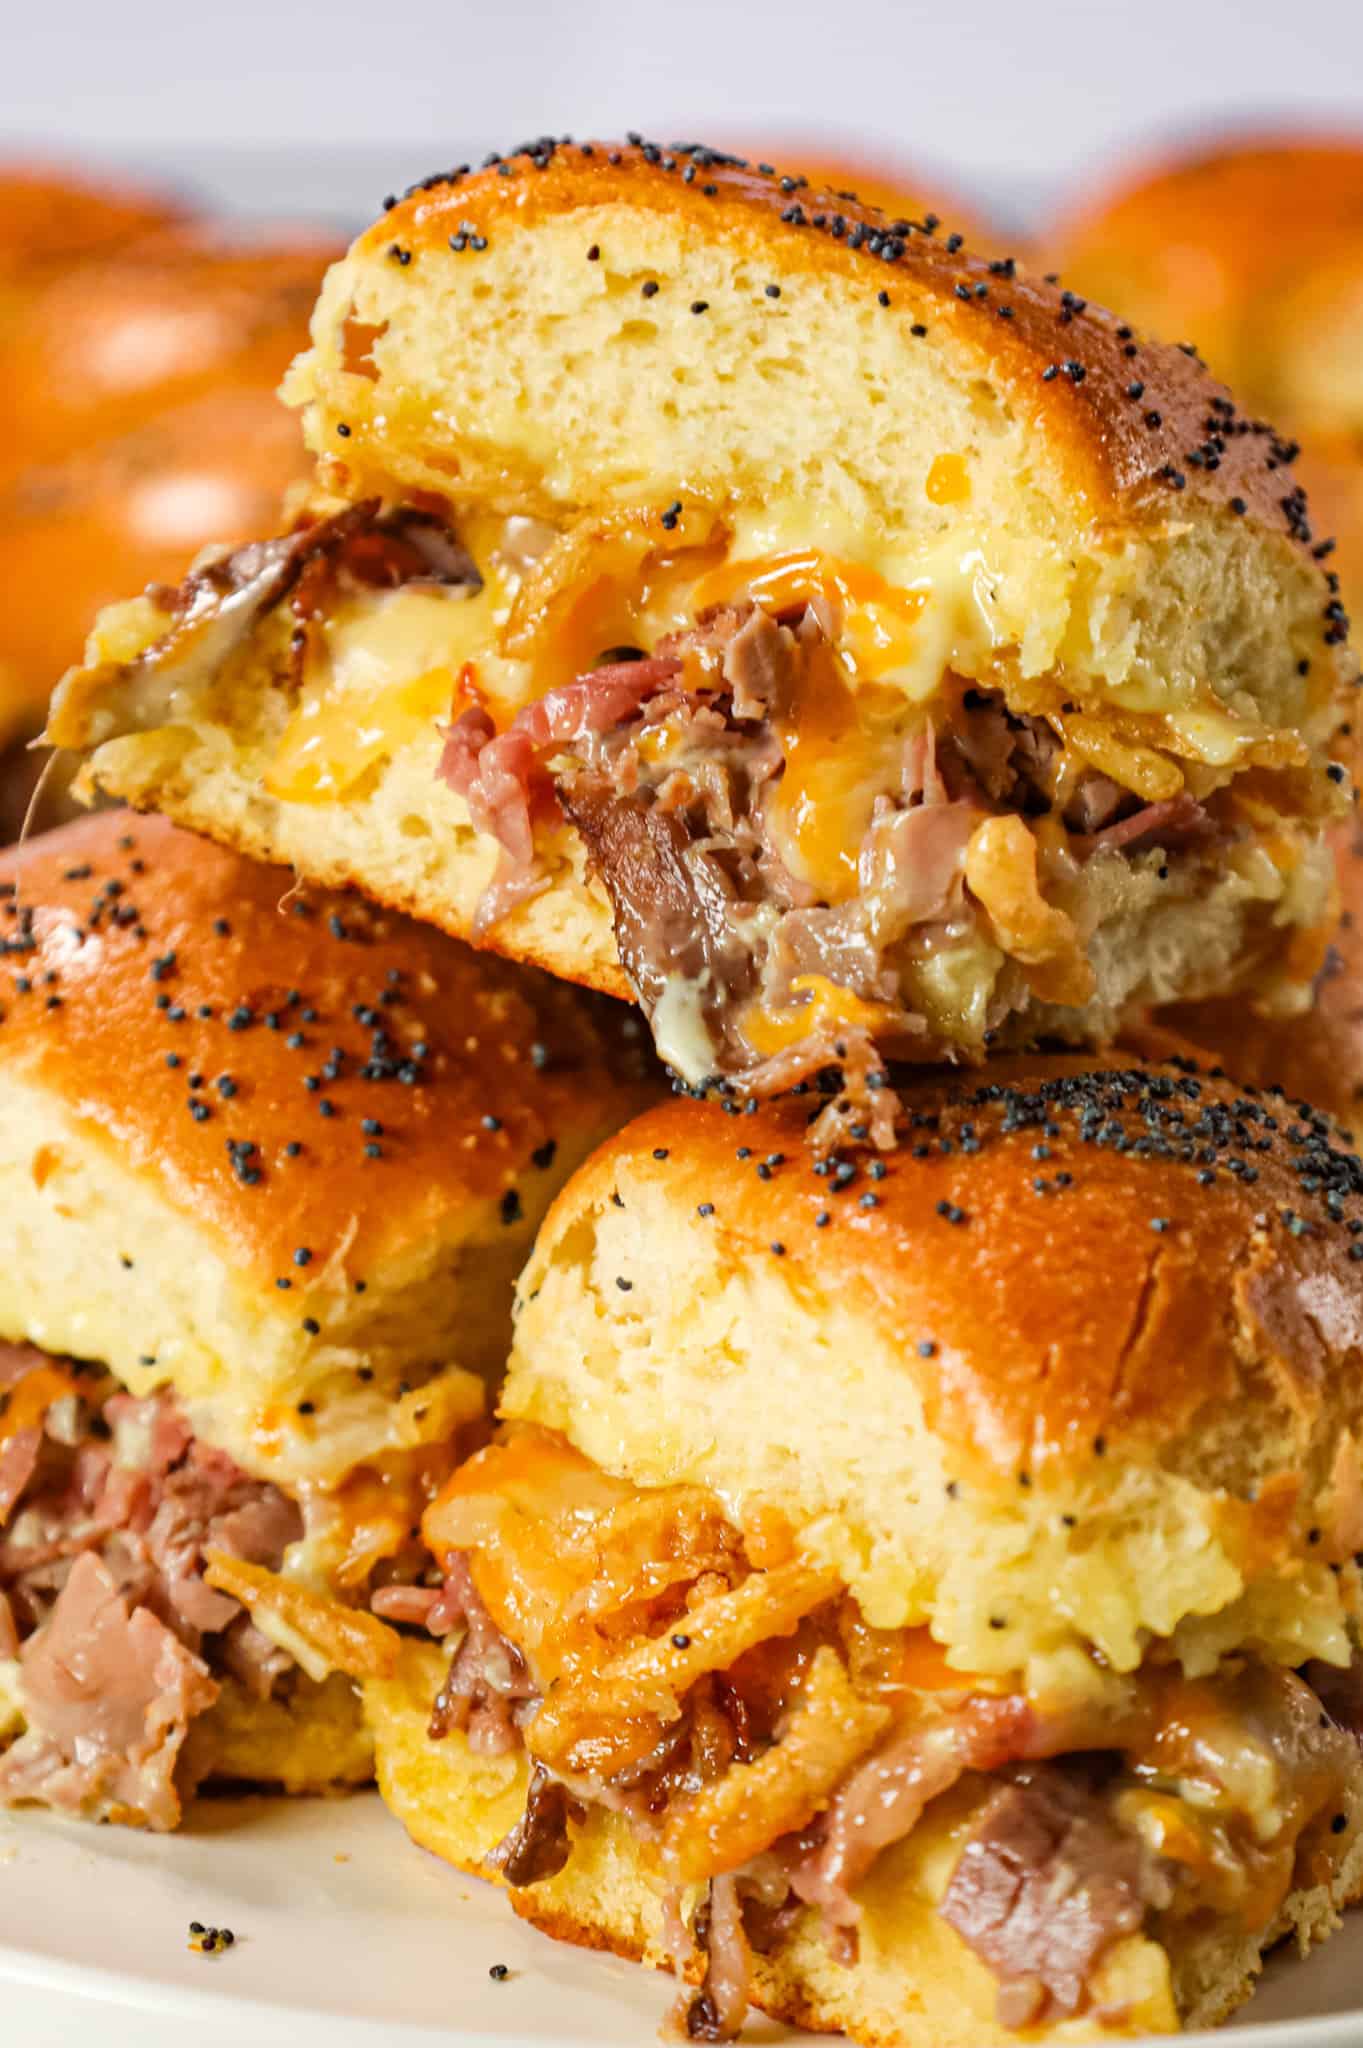 Roast Beef Sliders are an easy dinner or party snack made with dinner rolls and loaded with deli shaved roast beef, mayo, horseradish, mozzarella, cheddar and crispy fried onions.